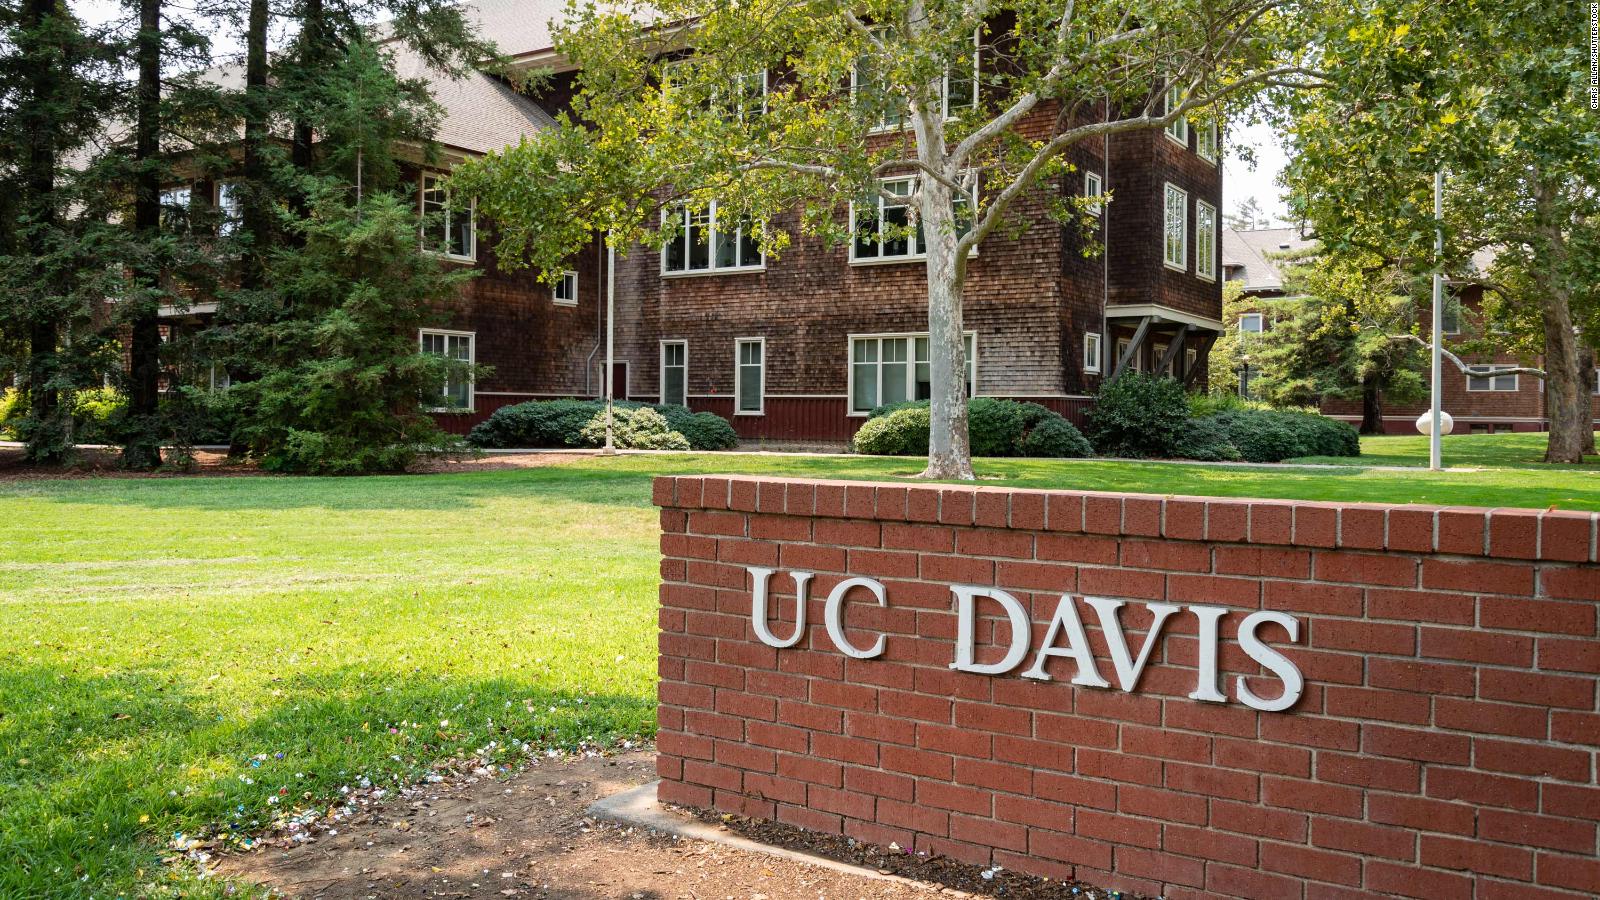 UC Davis is offering students $75 to staycation for spring break - CNN